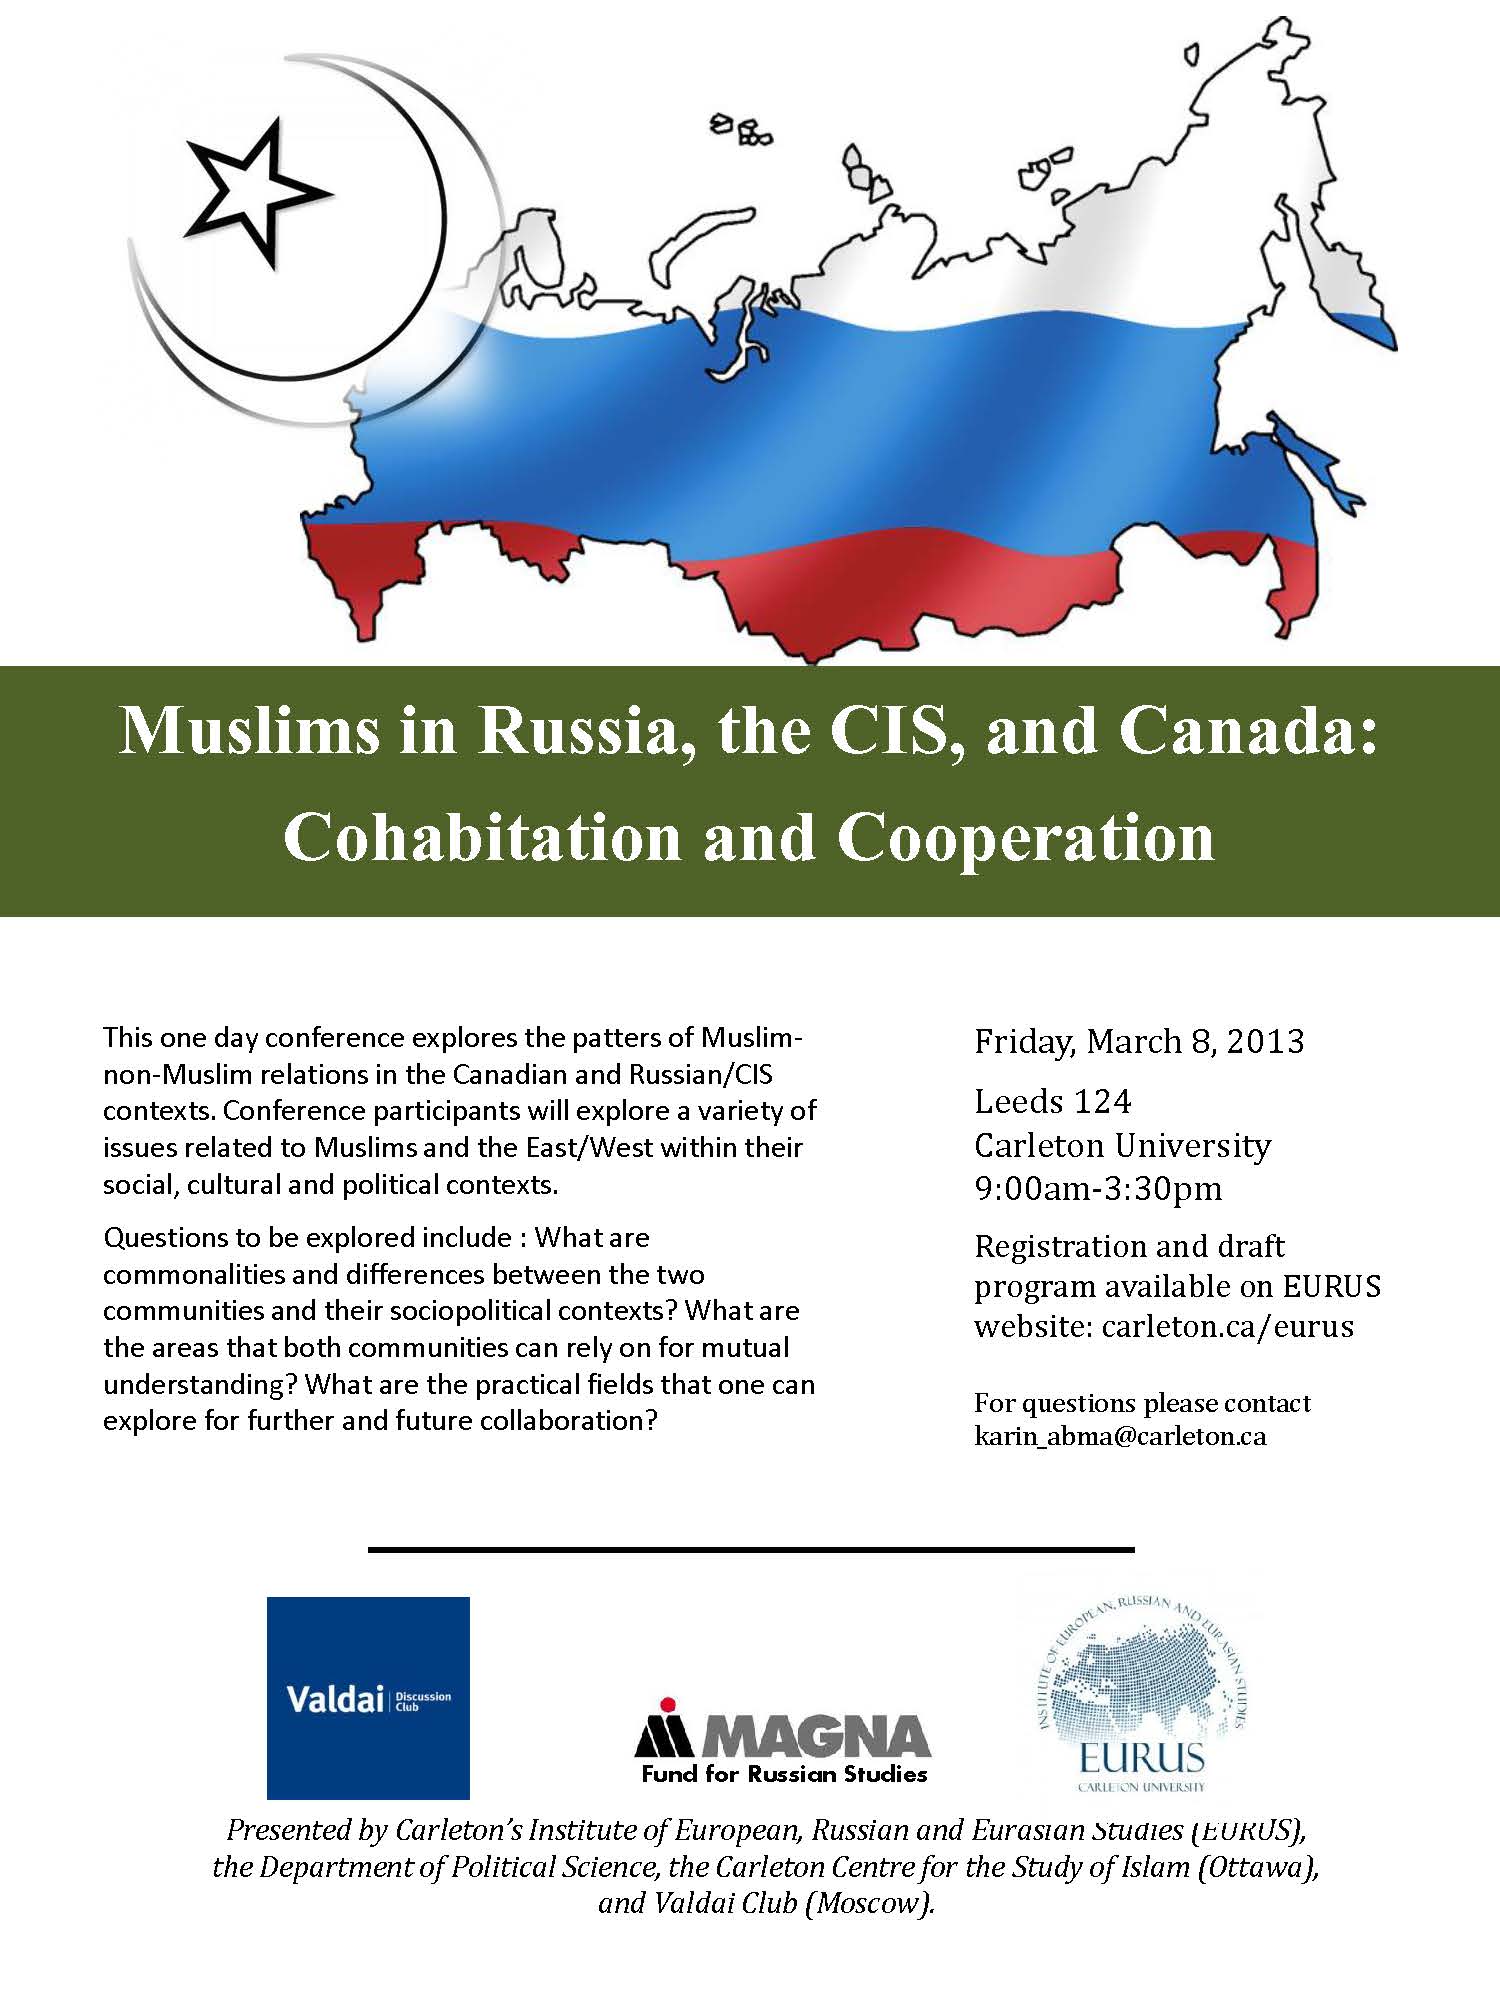 poster for conference on Muslims in Russia, CIS, Canada